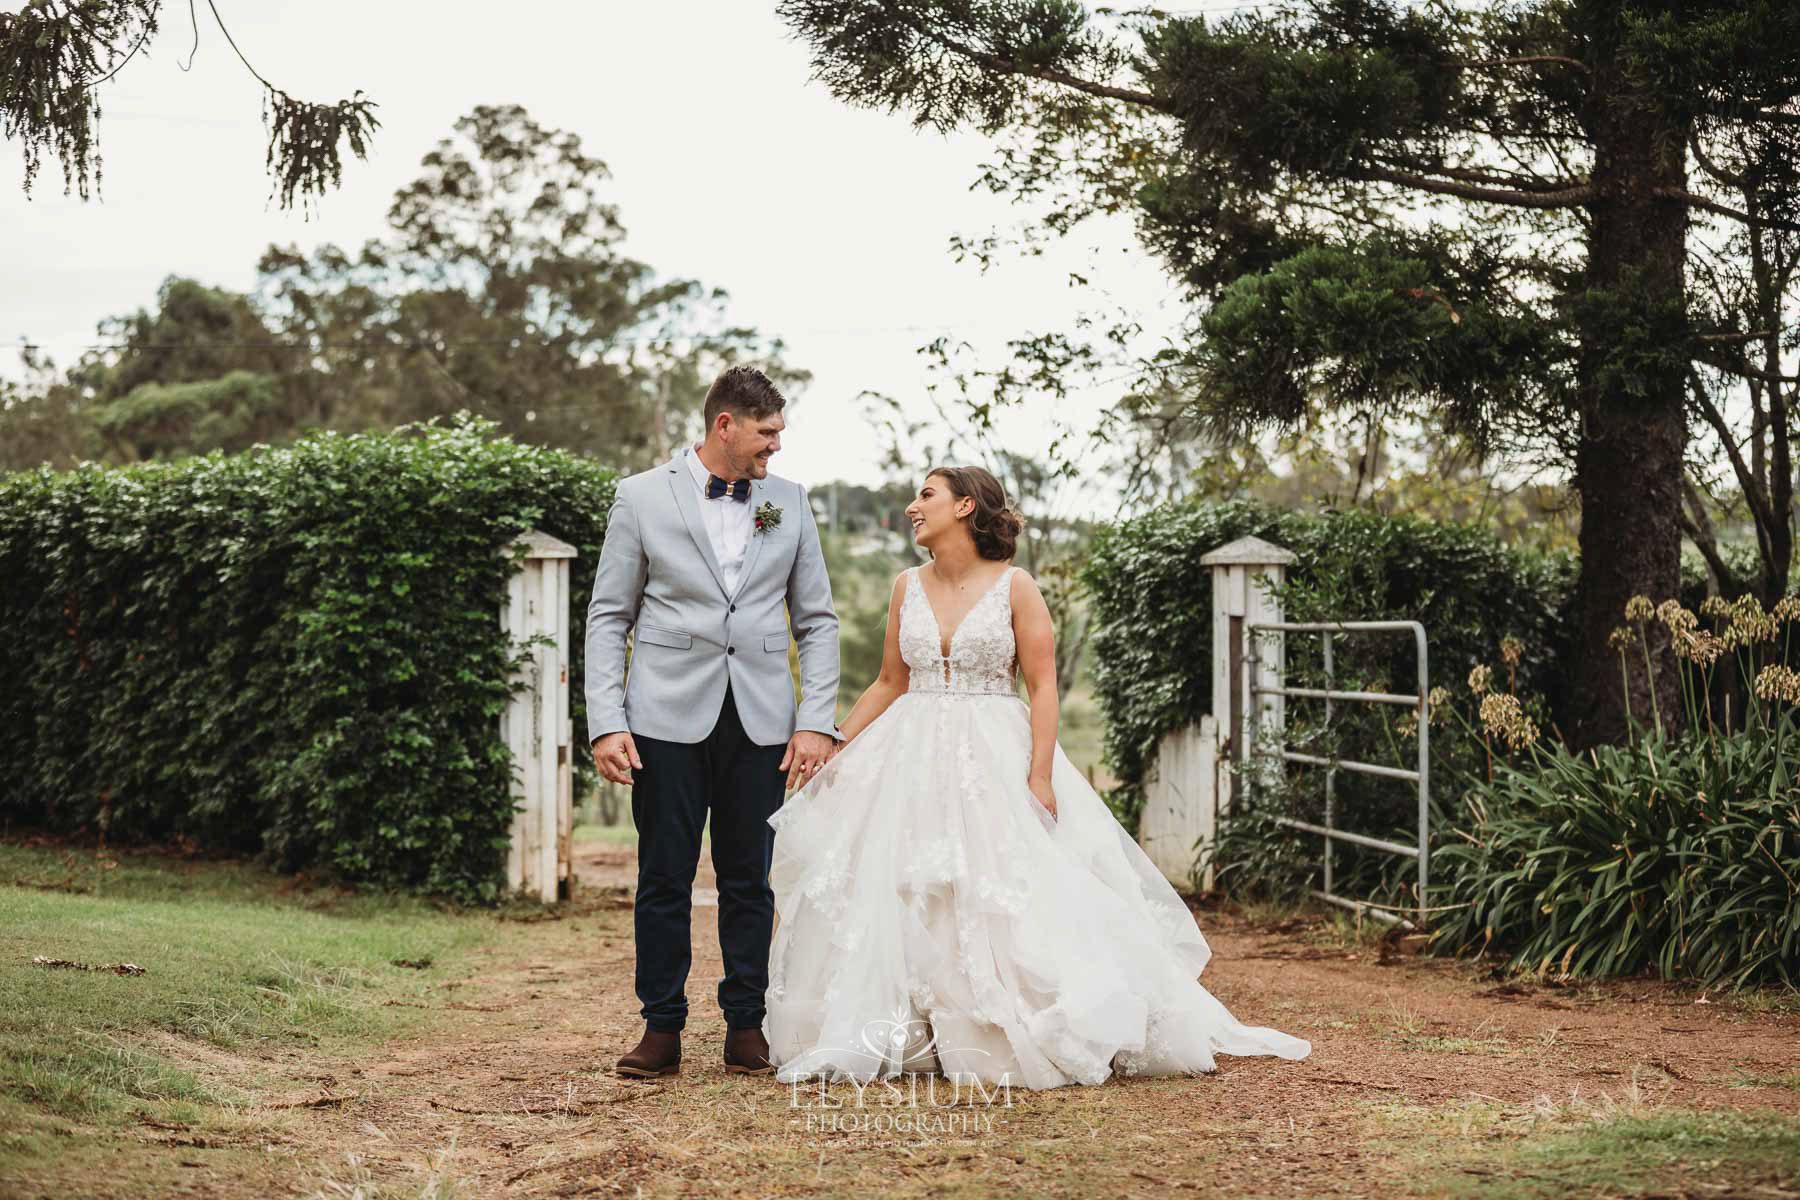 Gledswood Wedding - a bride and groom hold hands standing on a dirt driveway at the venue